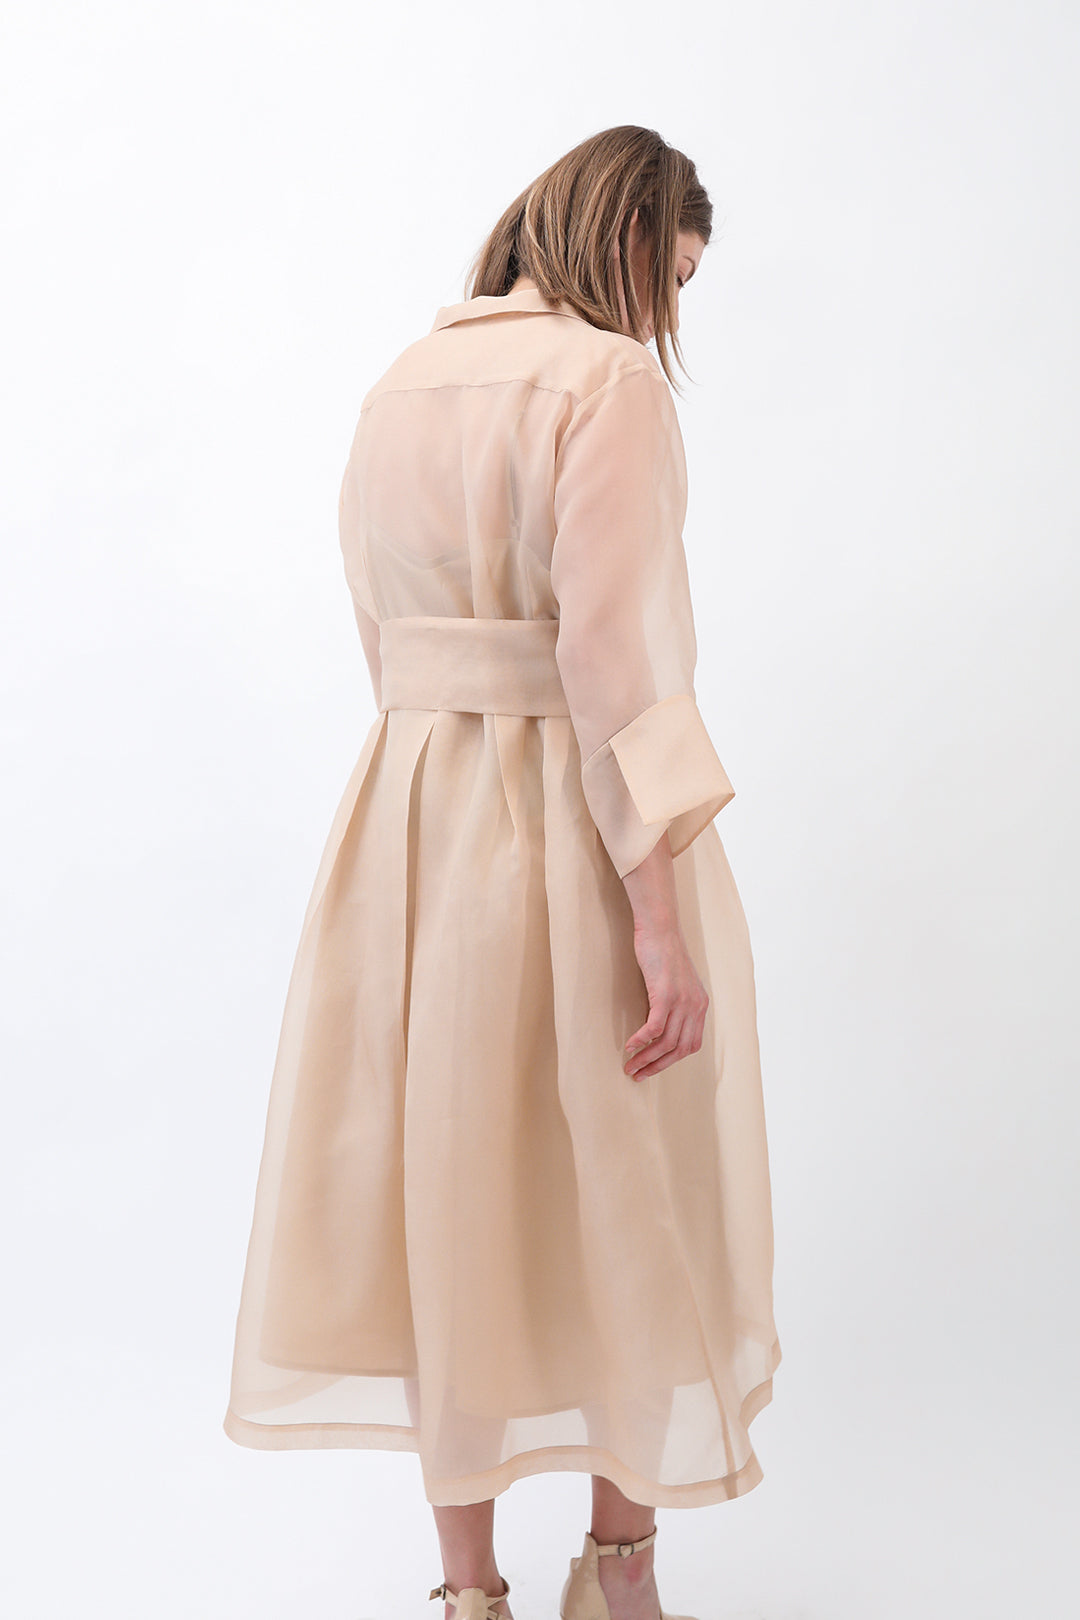 GABRIELLE DRESS IN SILK ORGANZA PEONY - PRE-ORDER AVAILABLE